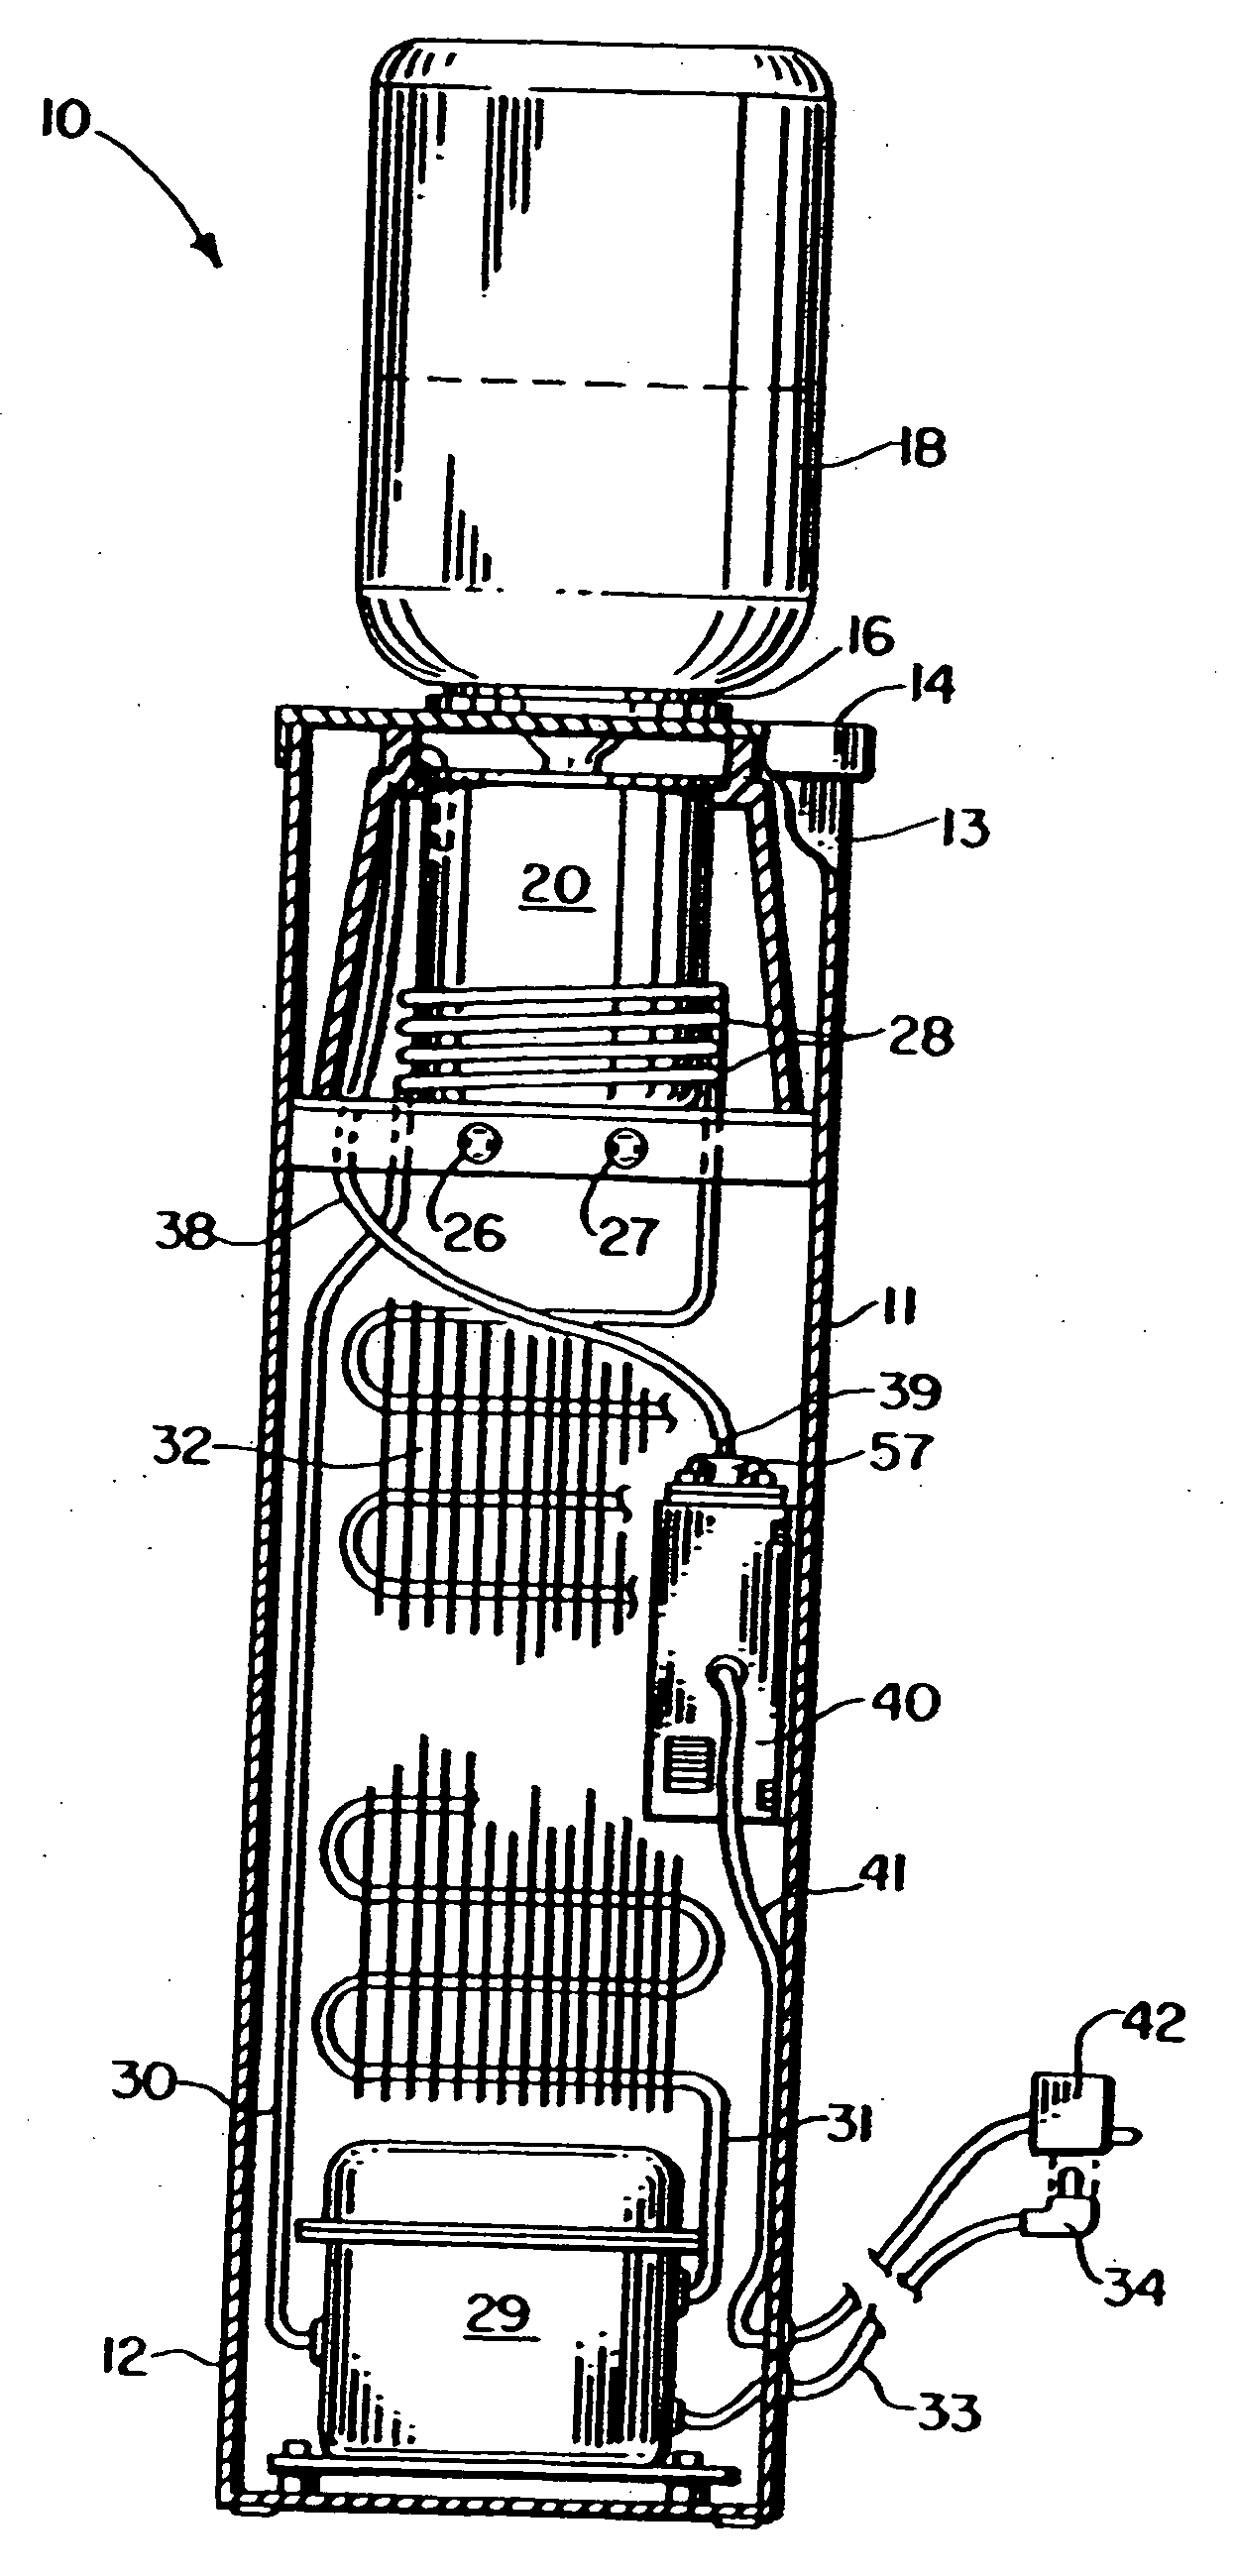 Method and apparatus for disinfecting a refrigerated water cooler resevoir